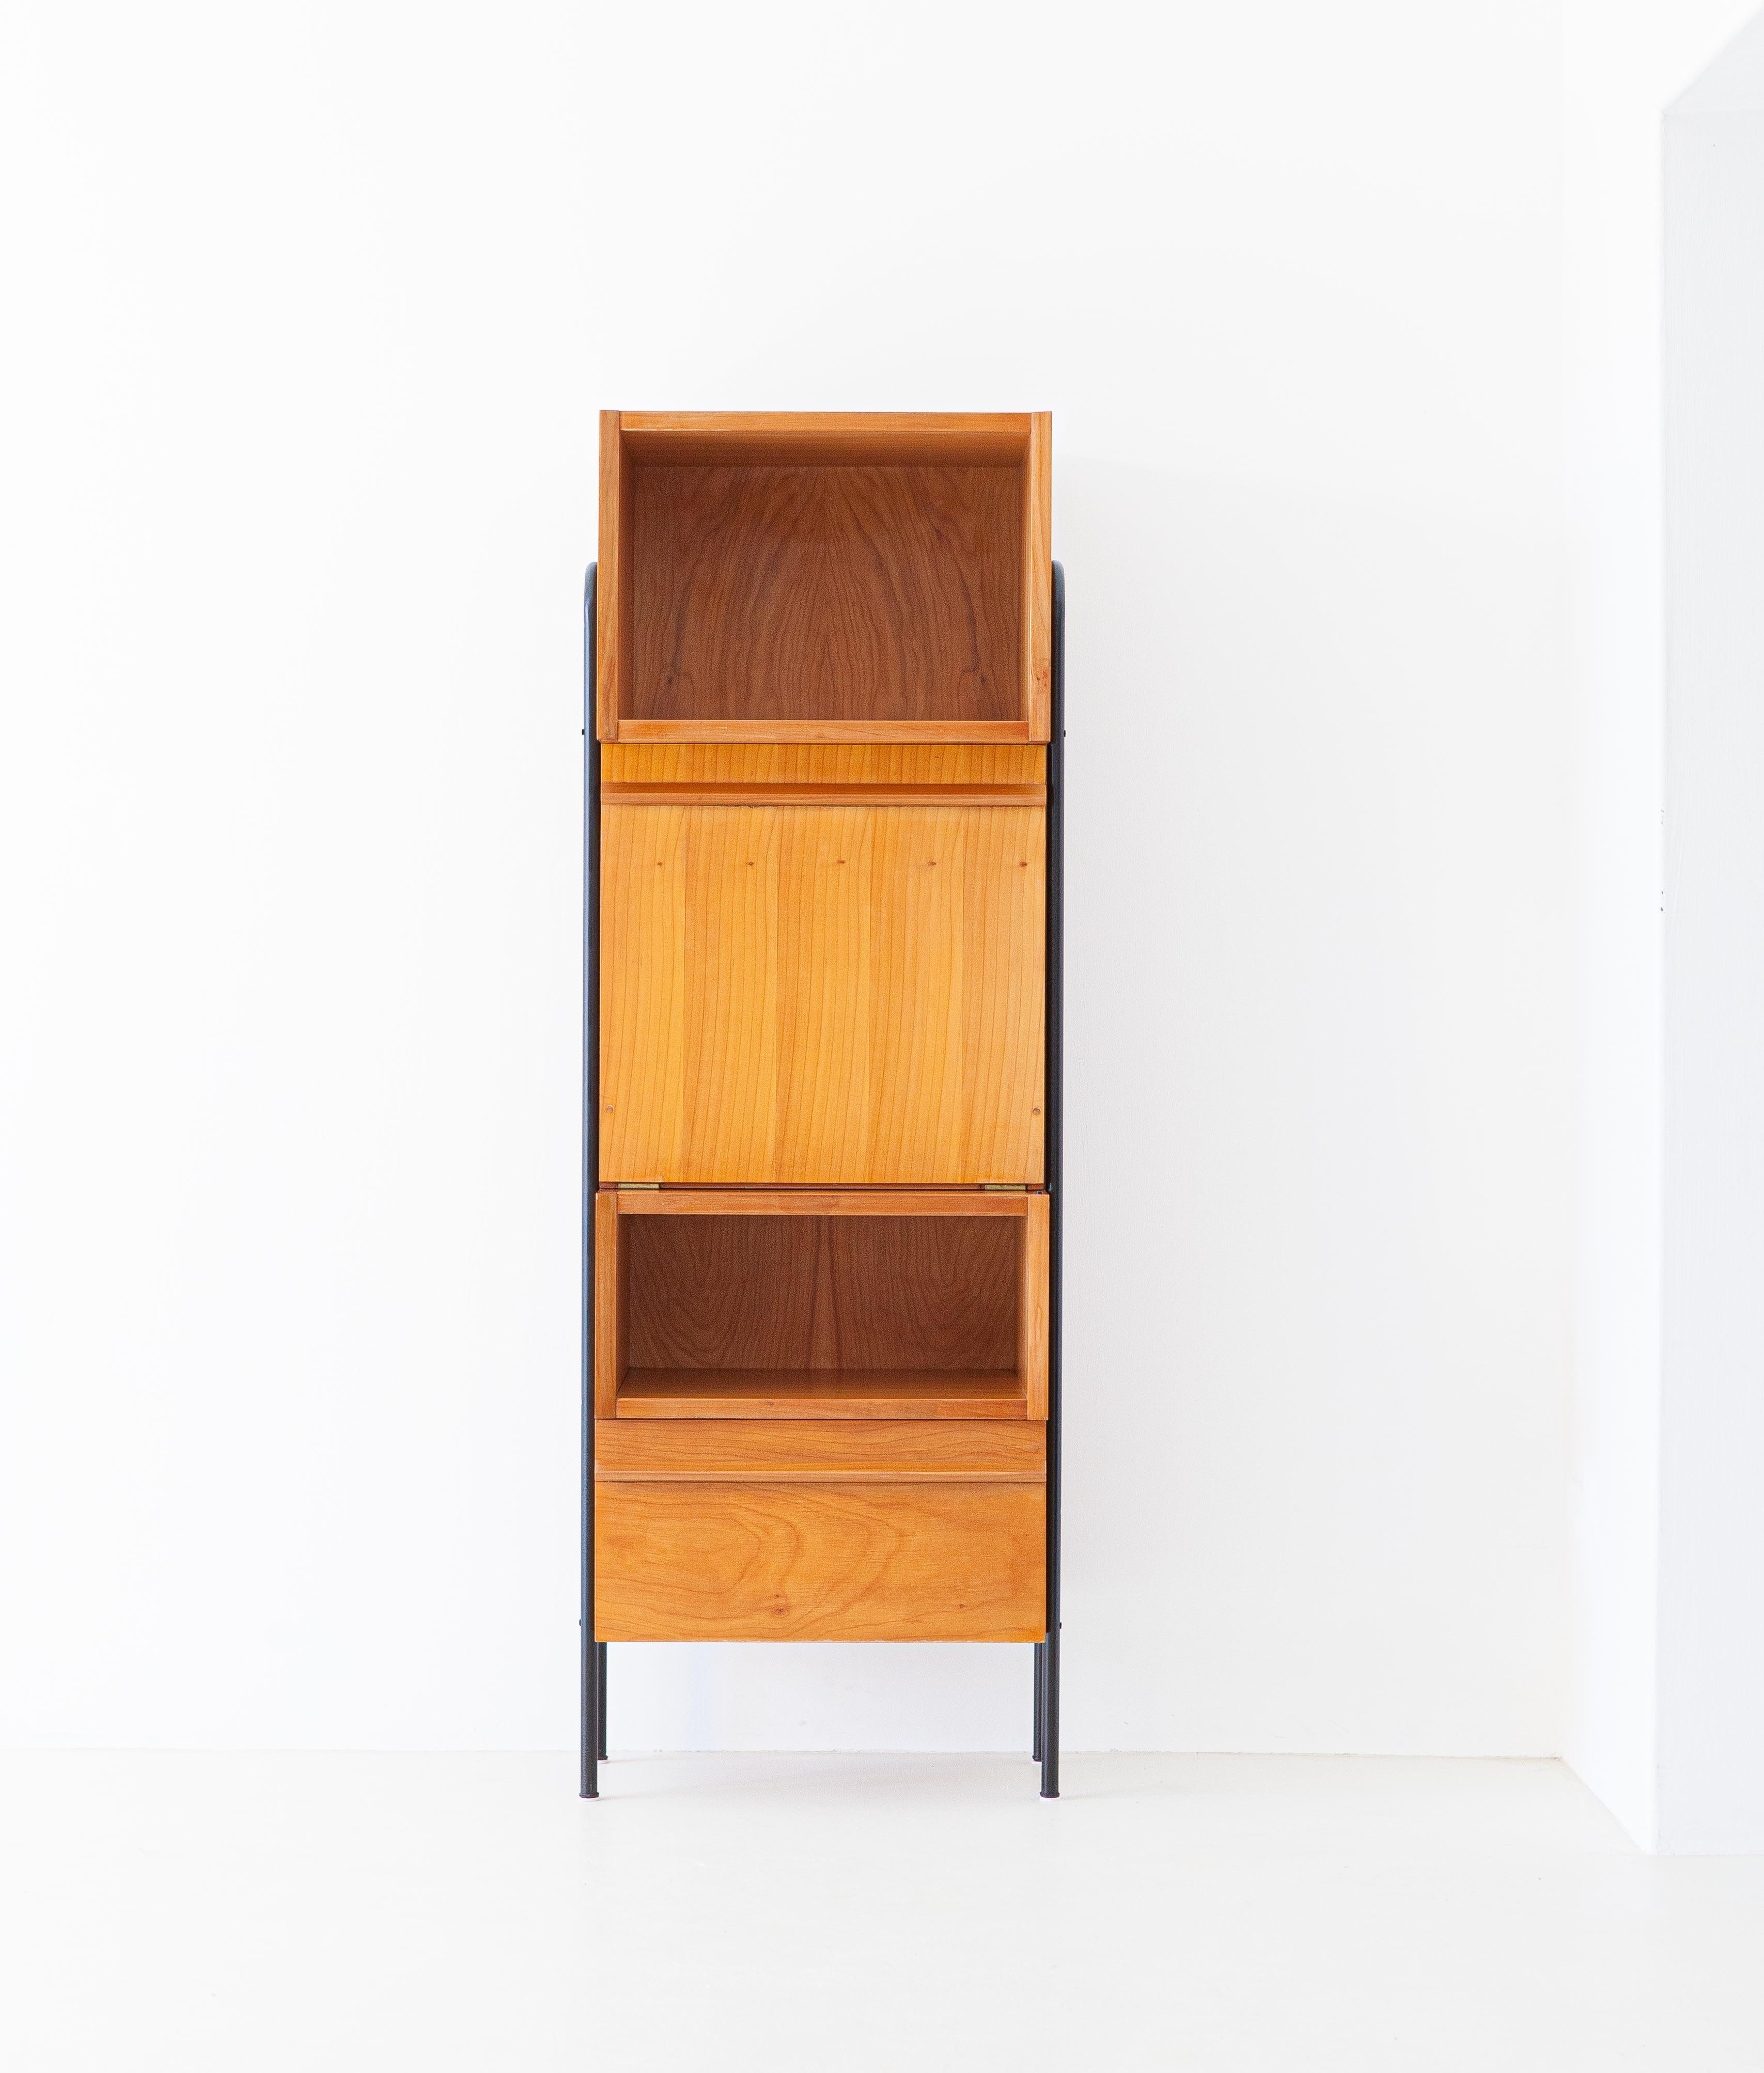 A modern multifunctional cabinet, manufactured in Italy during the 1950s
Veneered in light wood, milled wooden handles and black enameled iron legs.

This piece of furniture has two open containers, a very roomy flap door that can also be used as